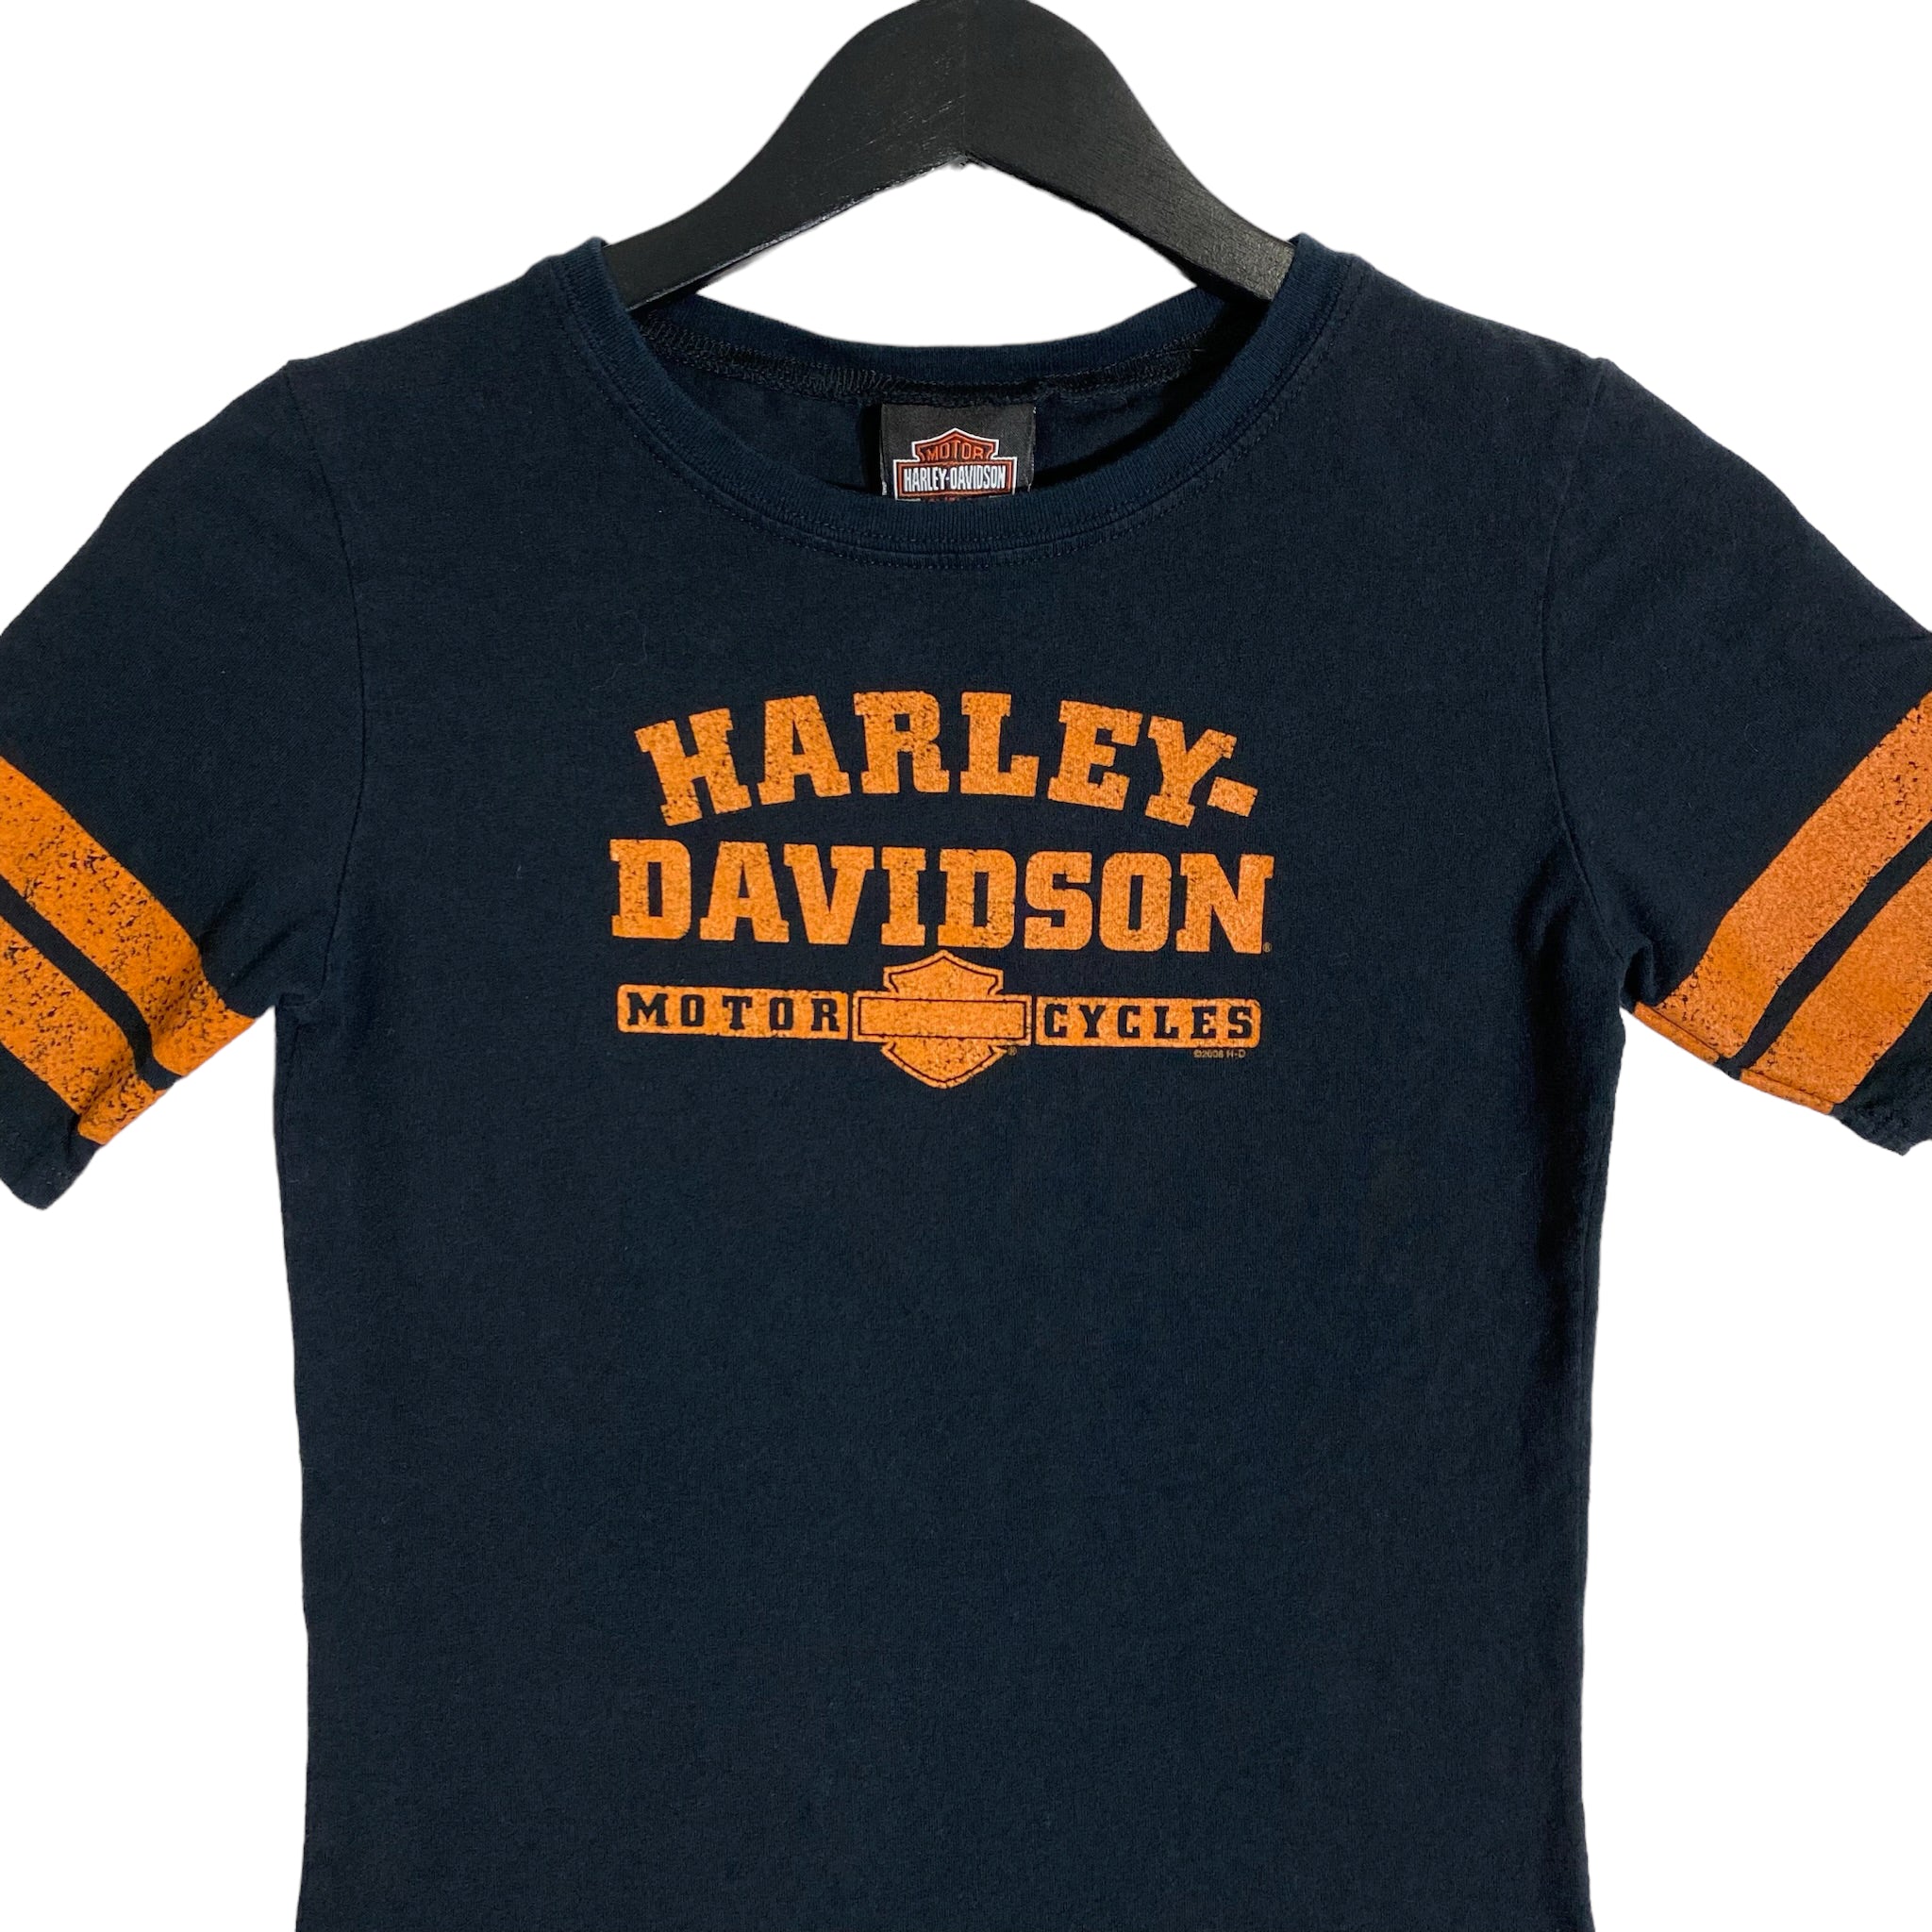 Harley Davidson Spellout Tee 2006